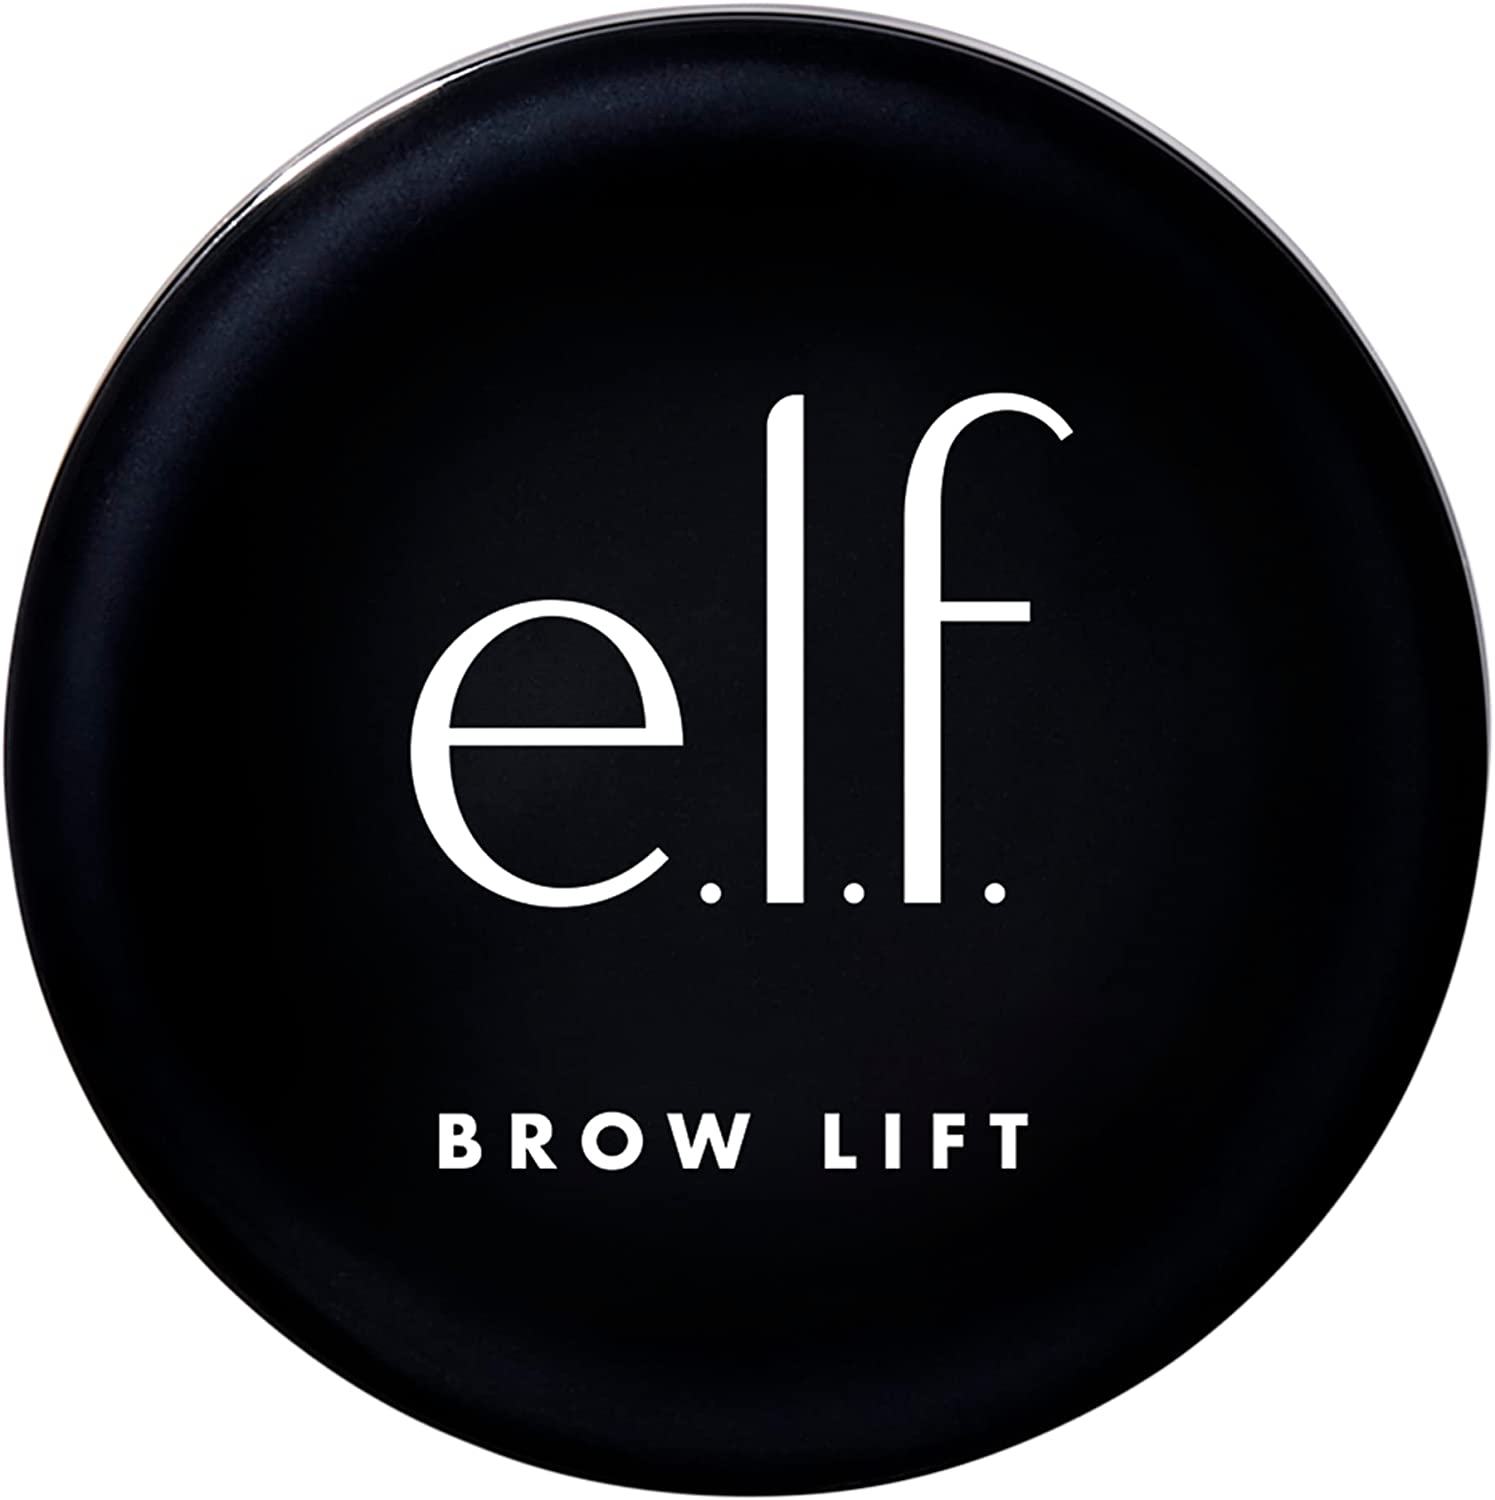 Brow Lift, Clear Eyebrow Shaping Wax for Holding Brows in Place, Creates a Fluffy Feathered Look - FoxMart™️ - e.l.f. Cosmetics